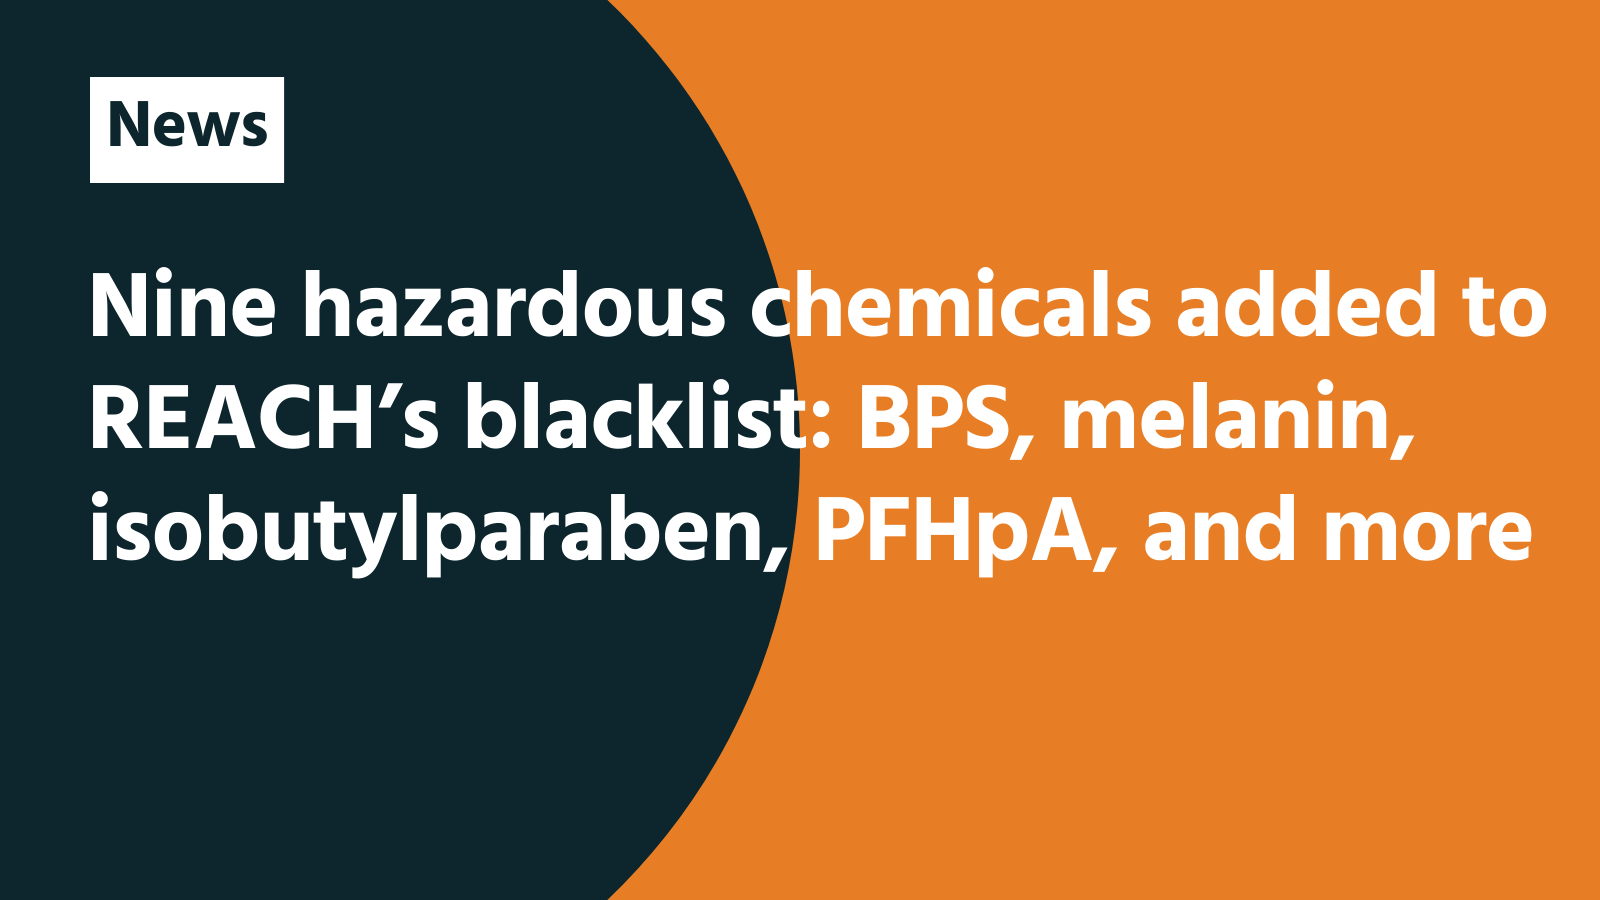 Nine hazardous chemicals added to REACH’s blacklist: BPS, melanin, isobutylparaben, PFHpA, and more